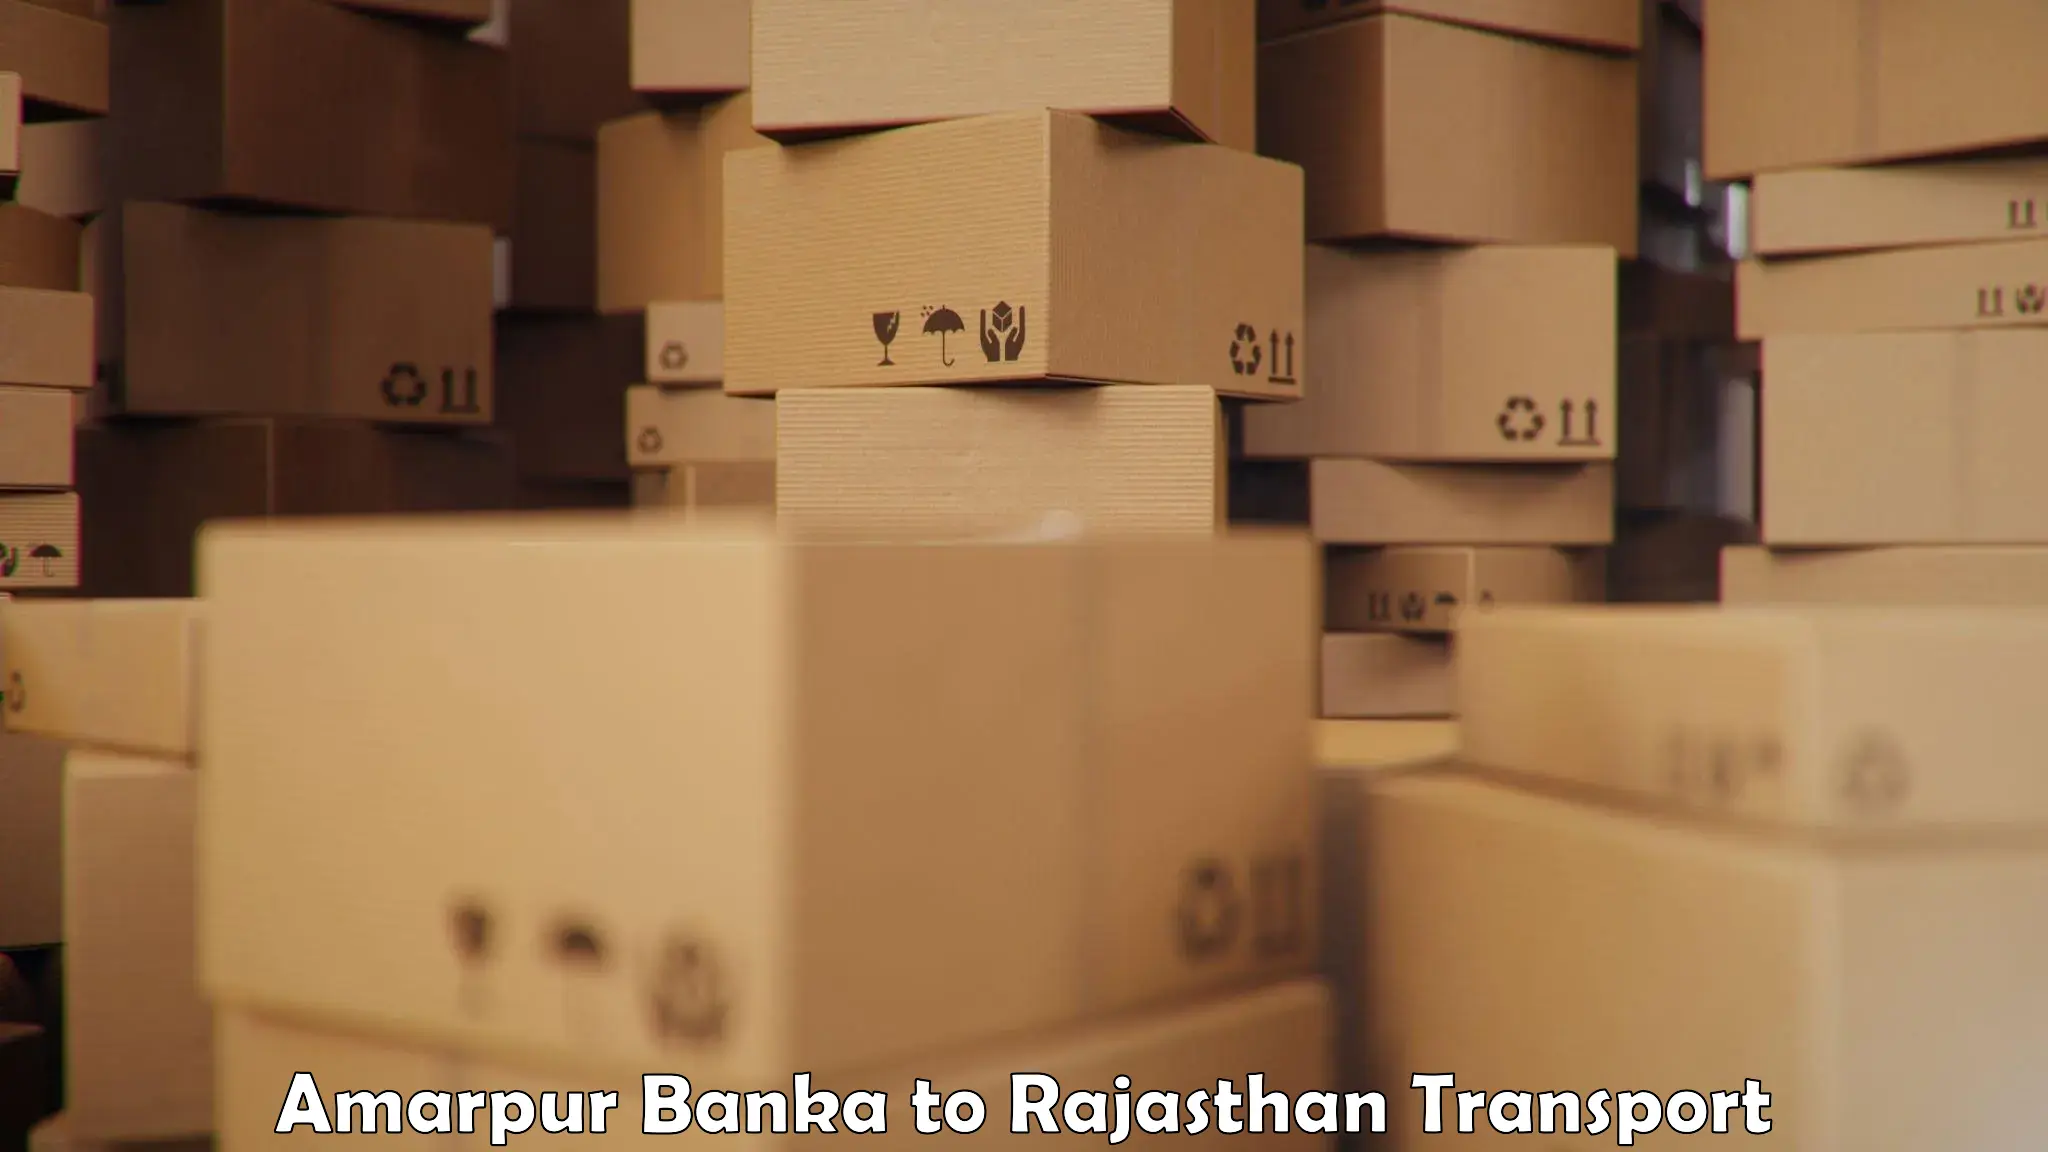 Container transportation services Amarpur Banka to Sikar